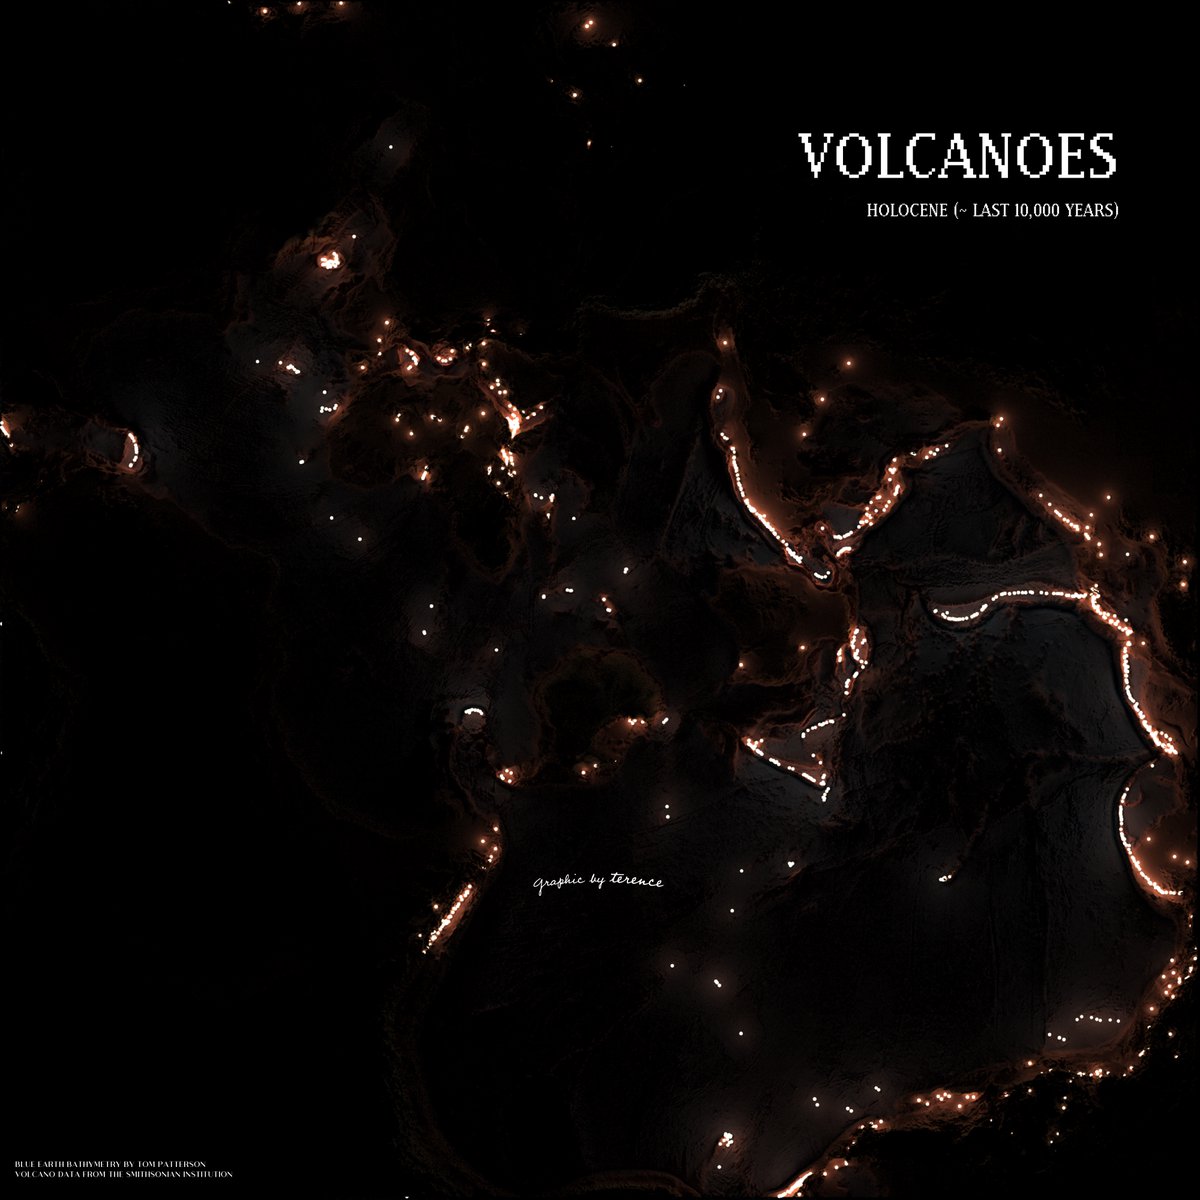 Holocene volcanoes of the world. Last one with this projection for now I think. 

#rayshader adventures, an #rstats tale